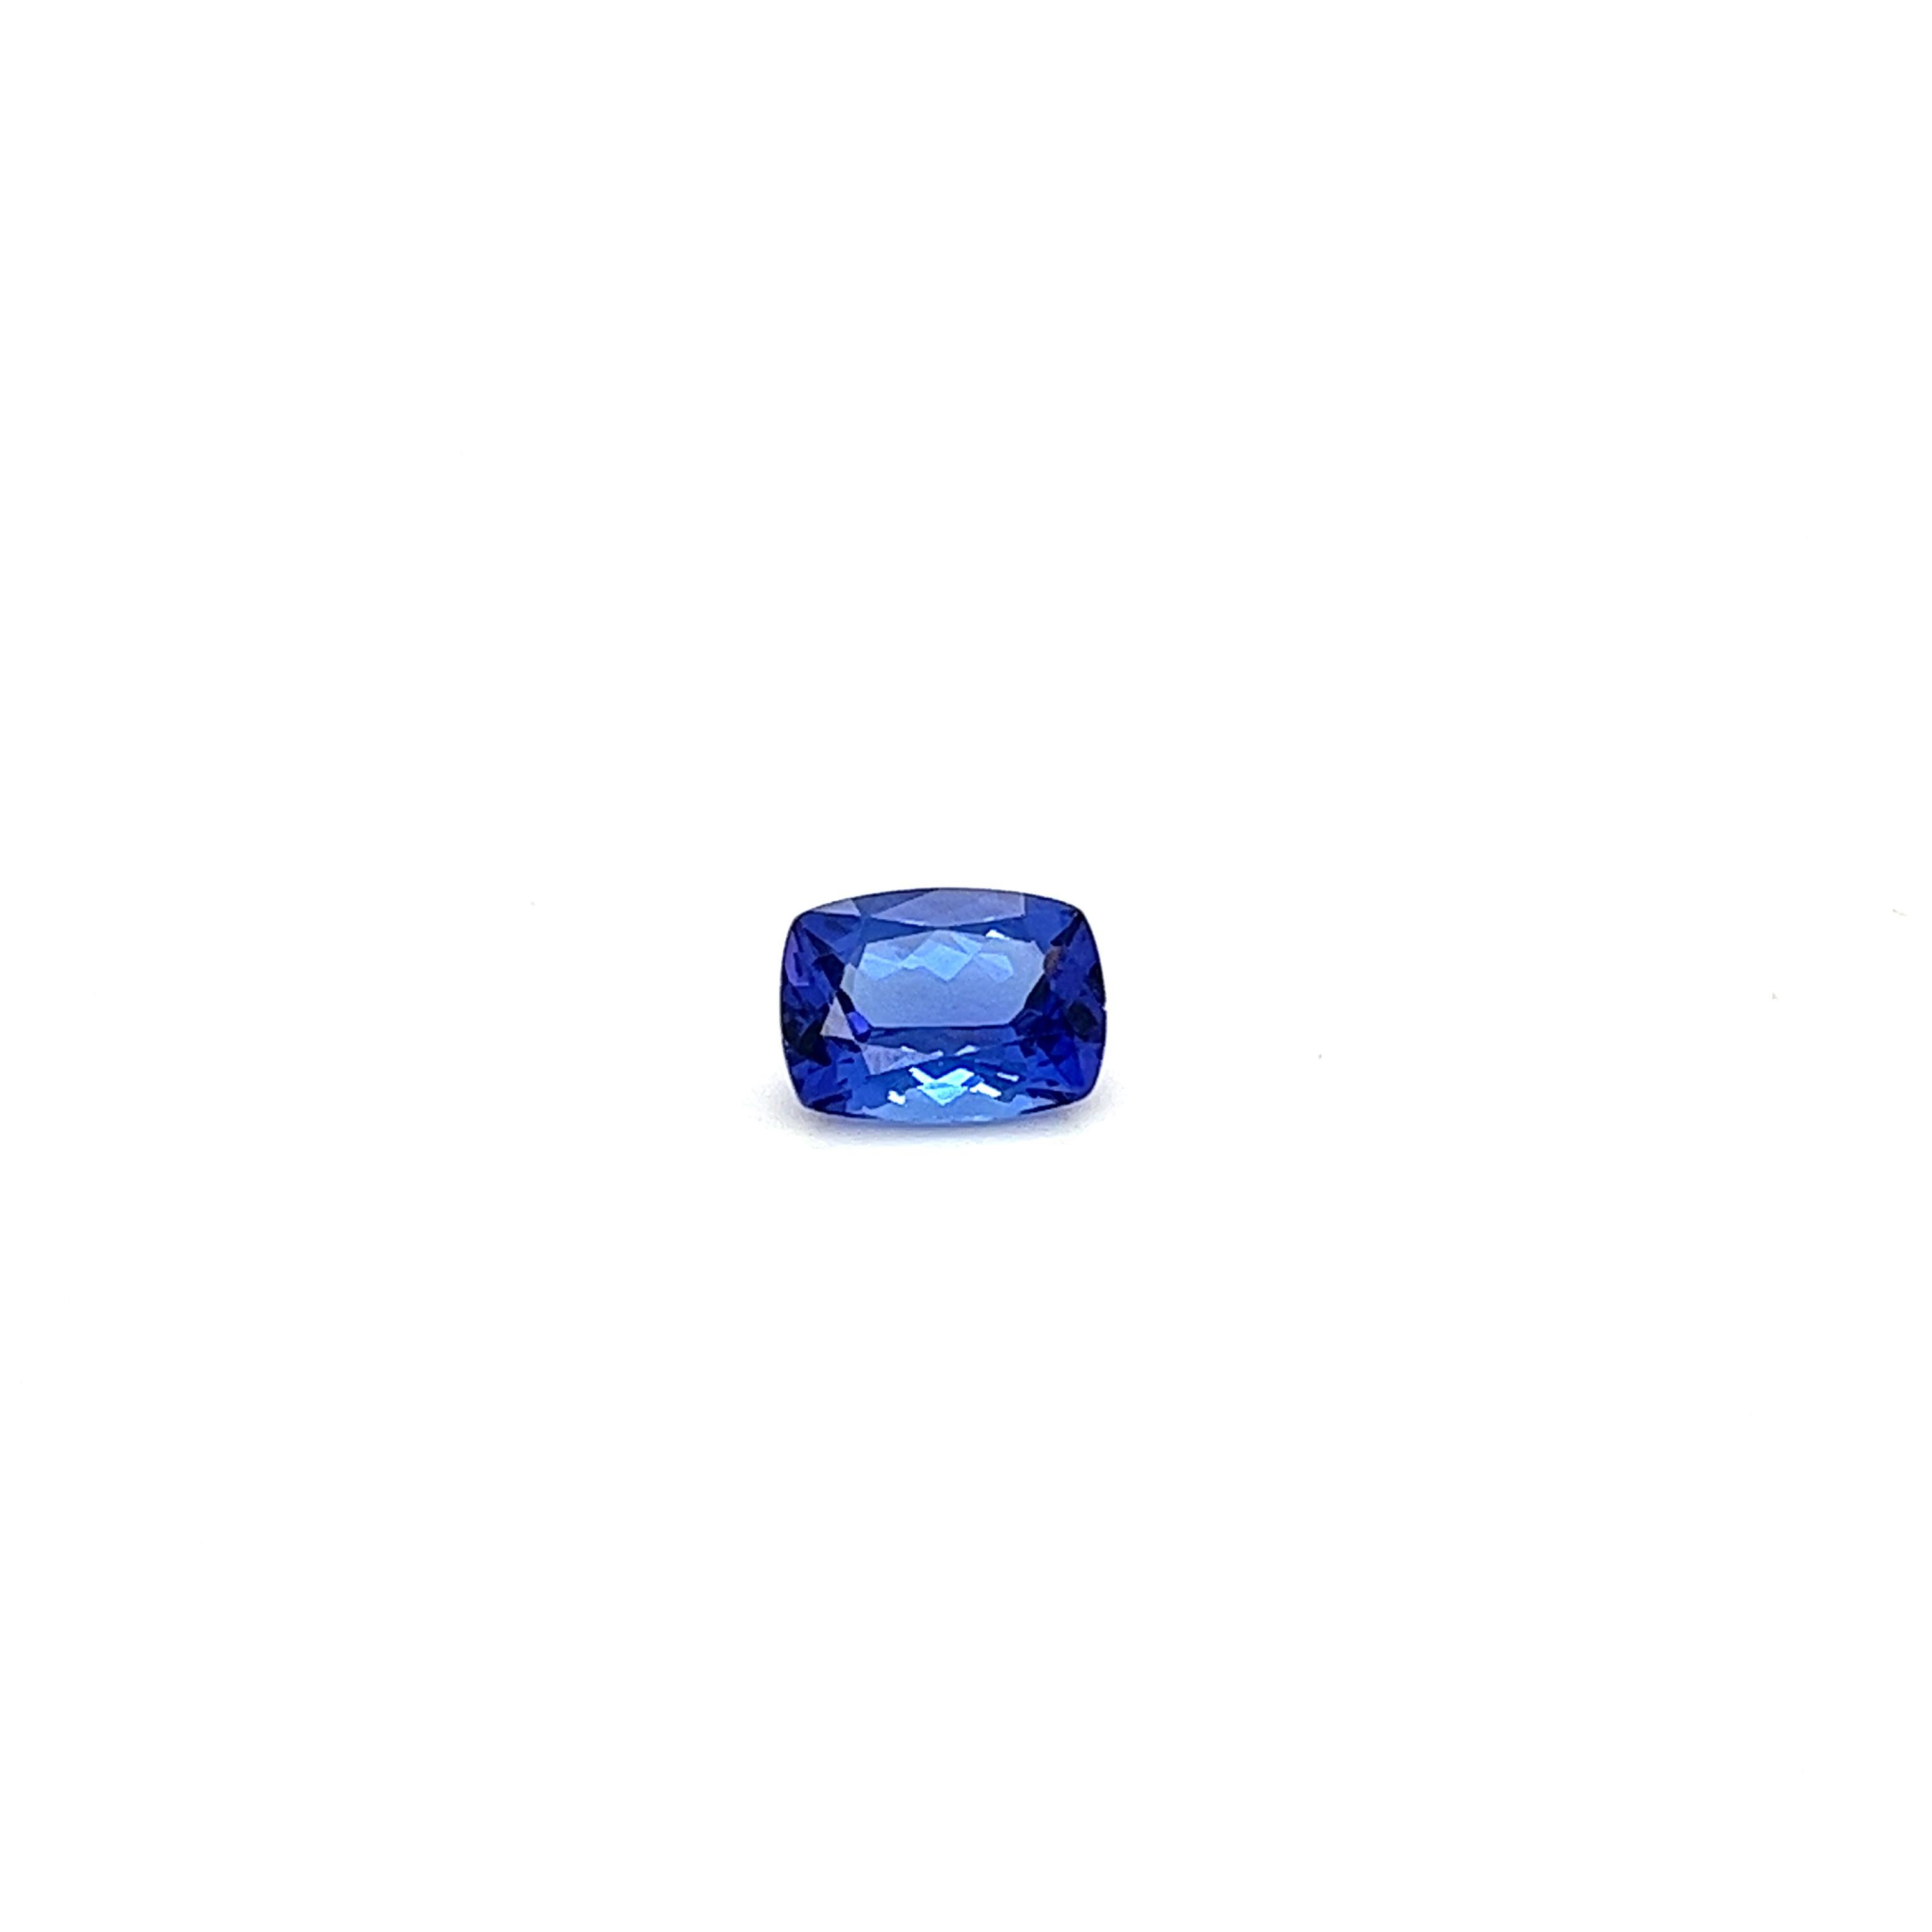 SKU - 
Size - 8x6mm
Shape - Cushion
Grade : SDLX
Weight - 1.52 Cts
Price - $385

SDLX Tanzanite is one of the rarest gemstones in the world. Get this beautiful gem to grace your collection with charm and shine. Tanzanite displays intense colour